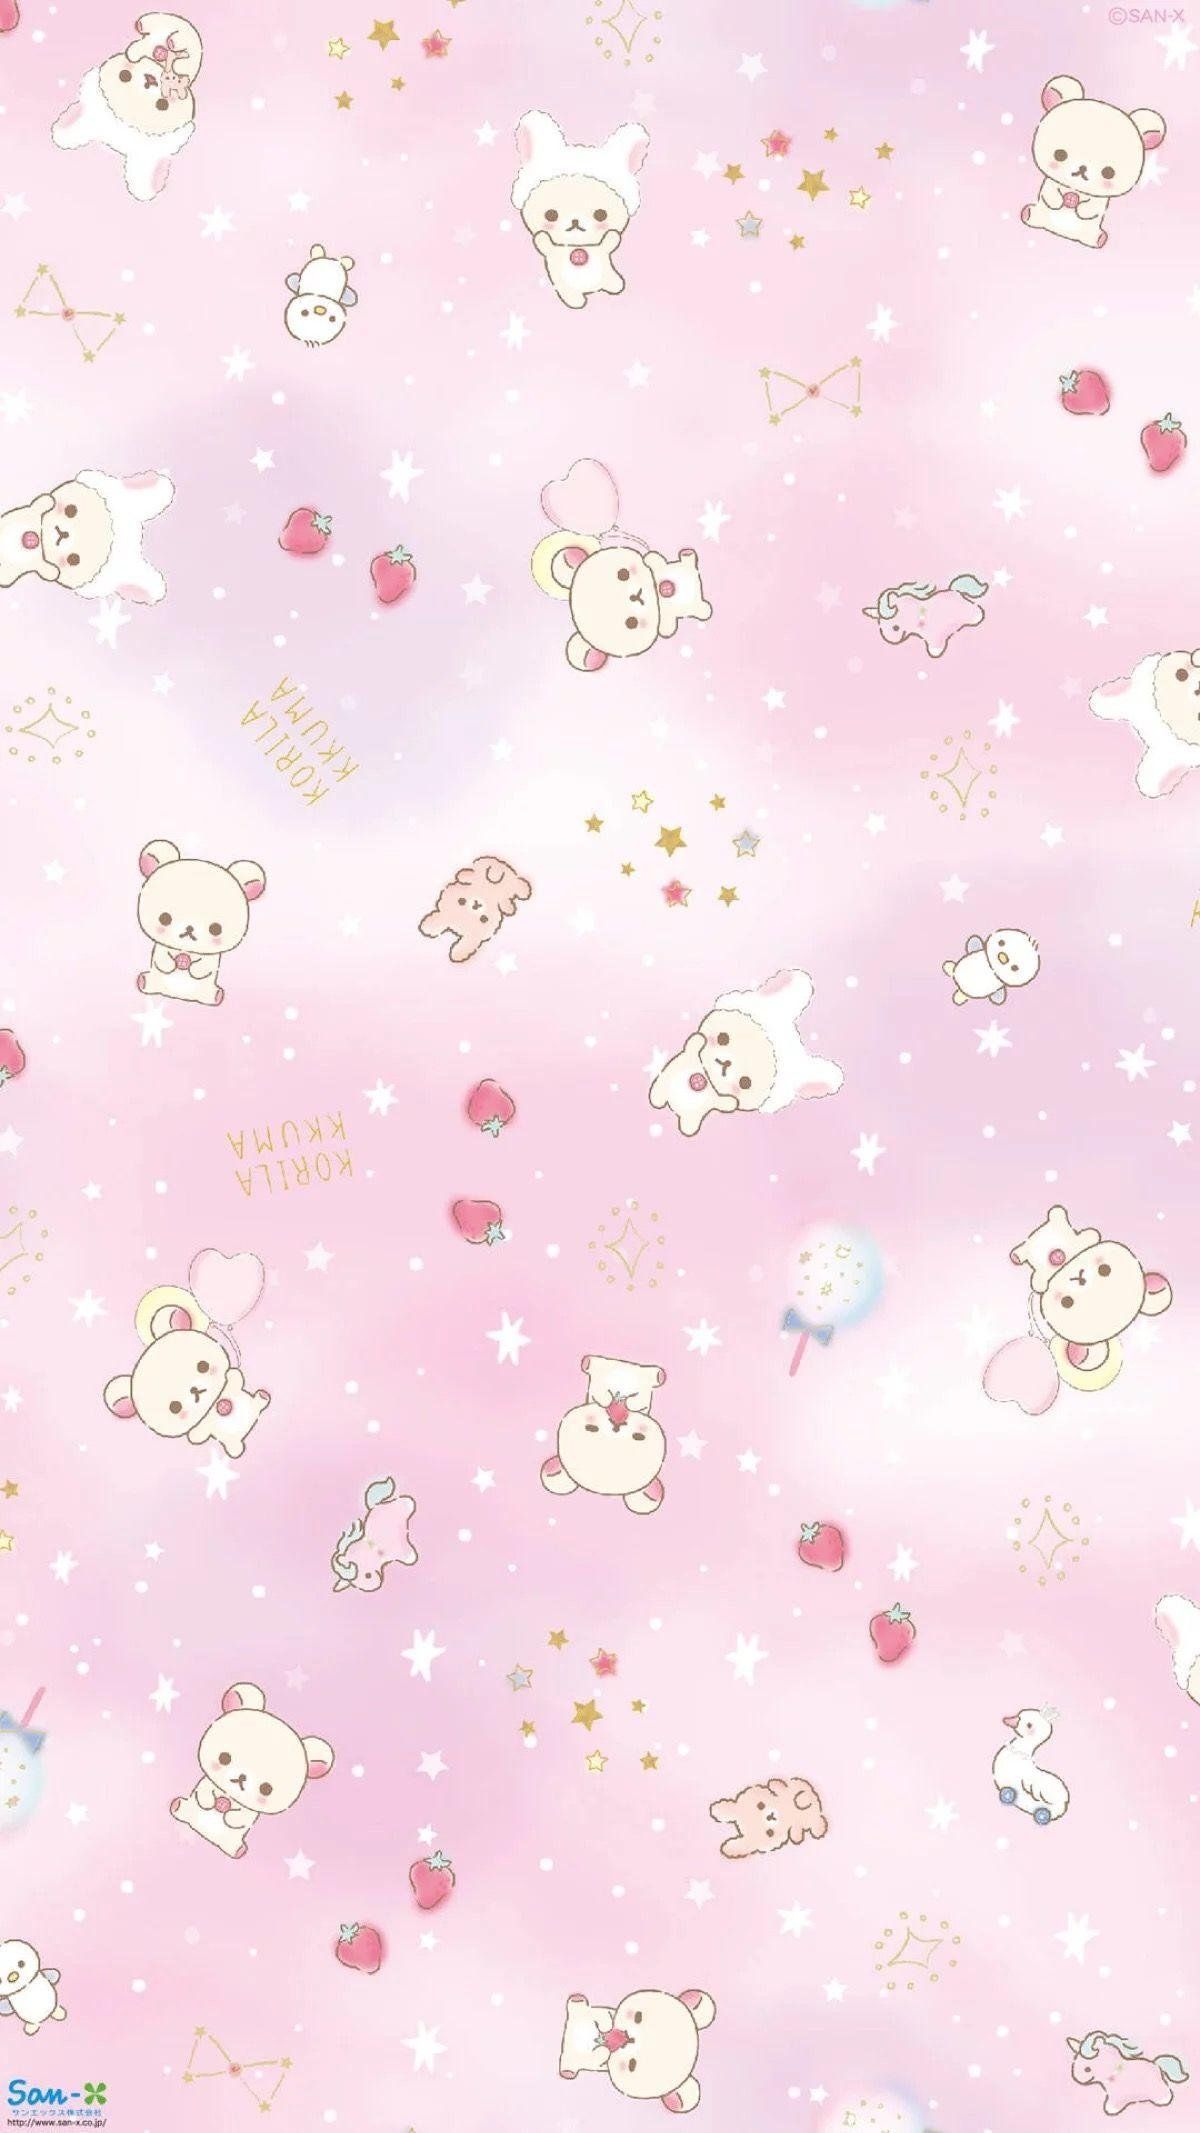 A pink background with cute white bears, stars, and hearts. - Pink, cute